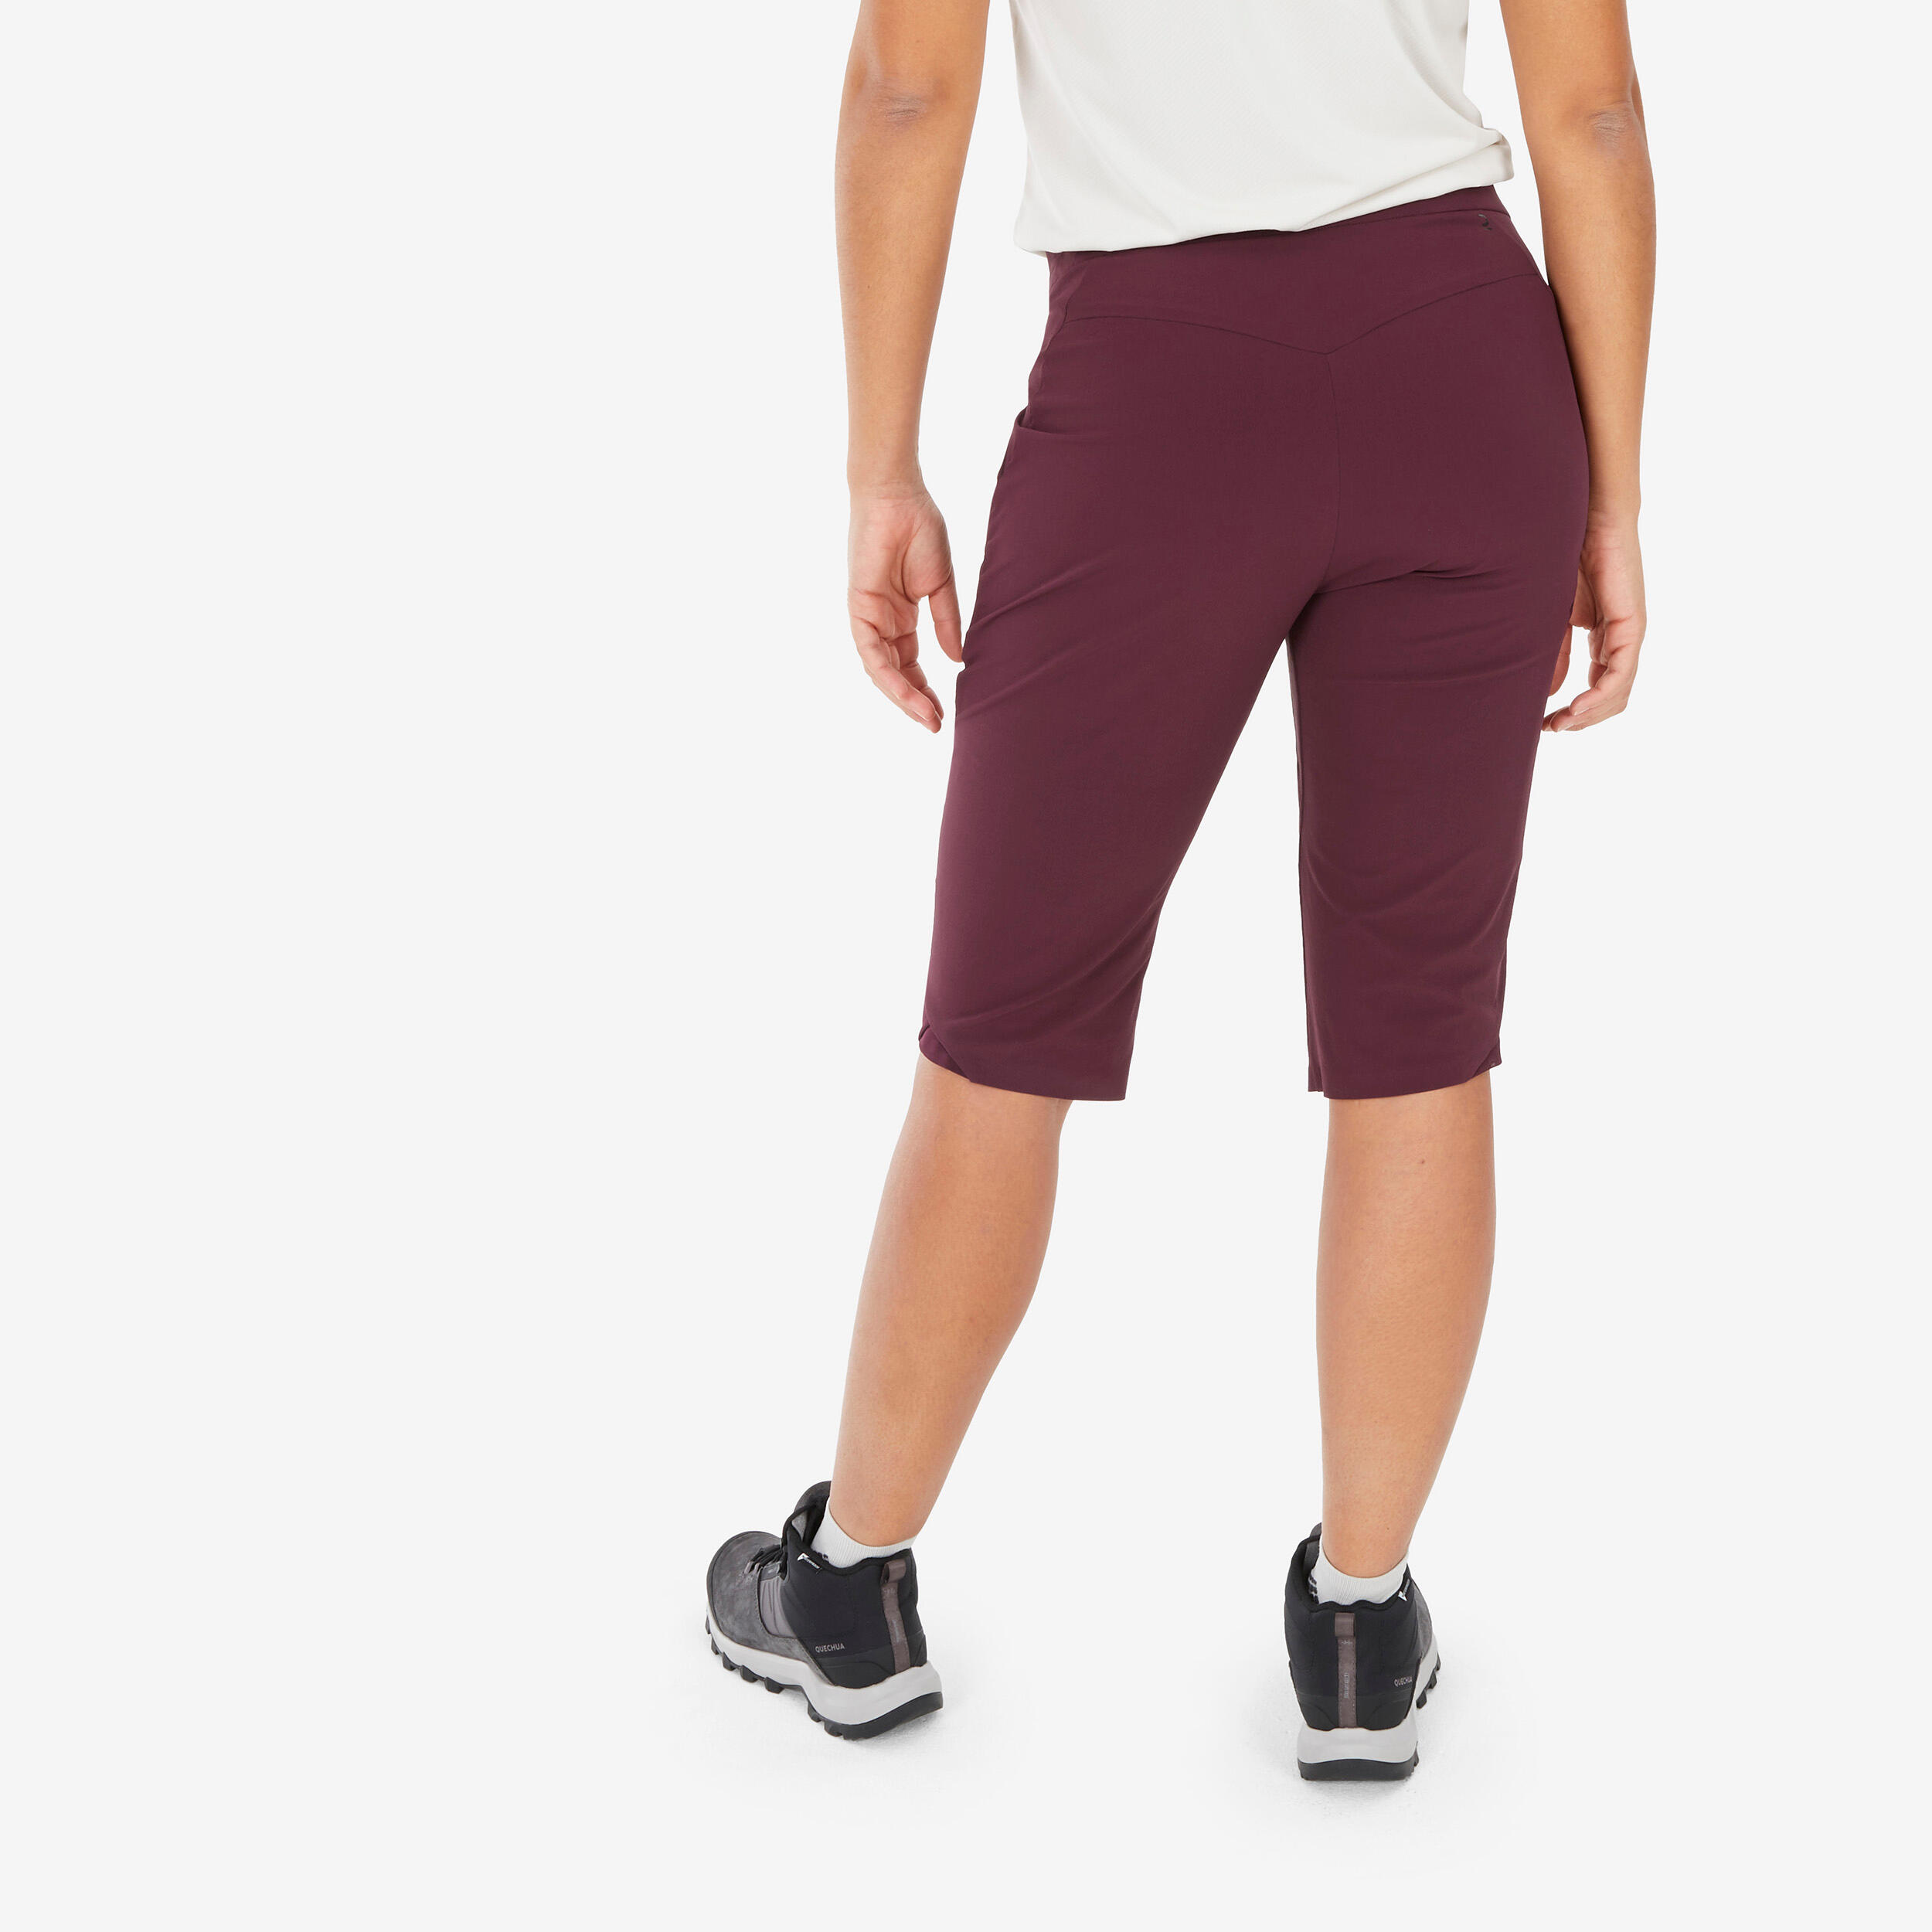 Women's hiking trousers - MH500 3/5